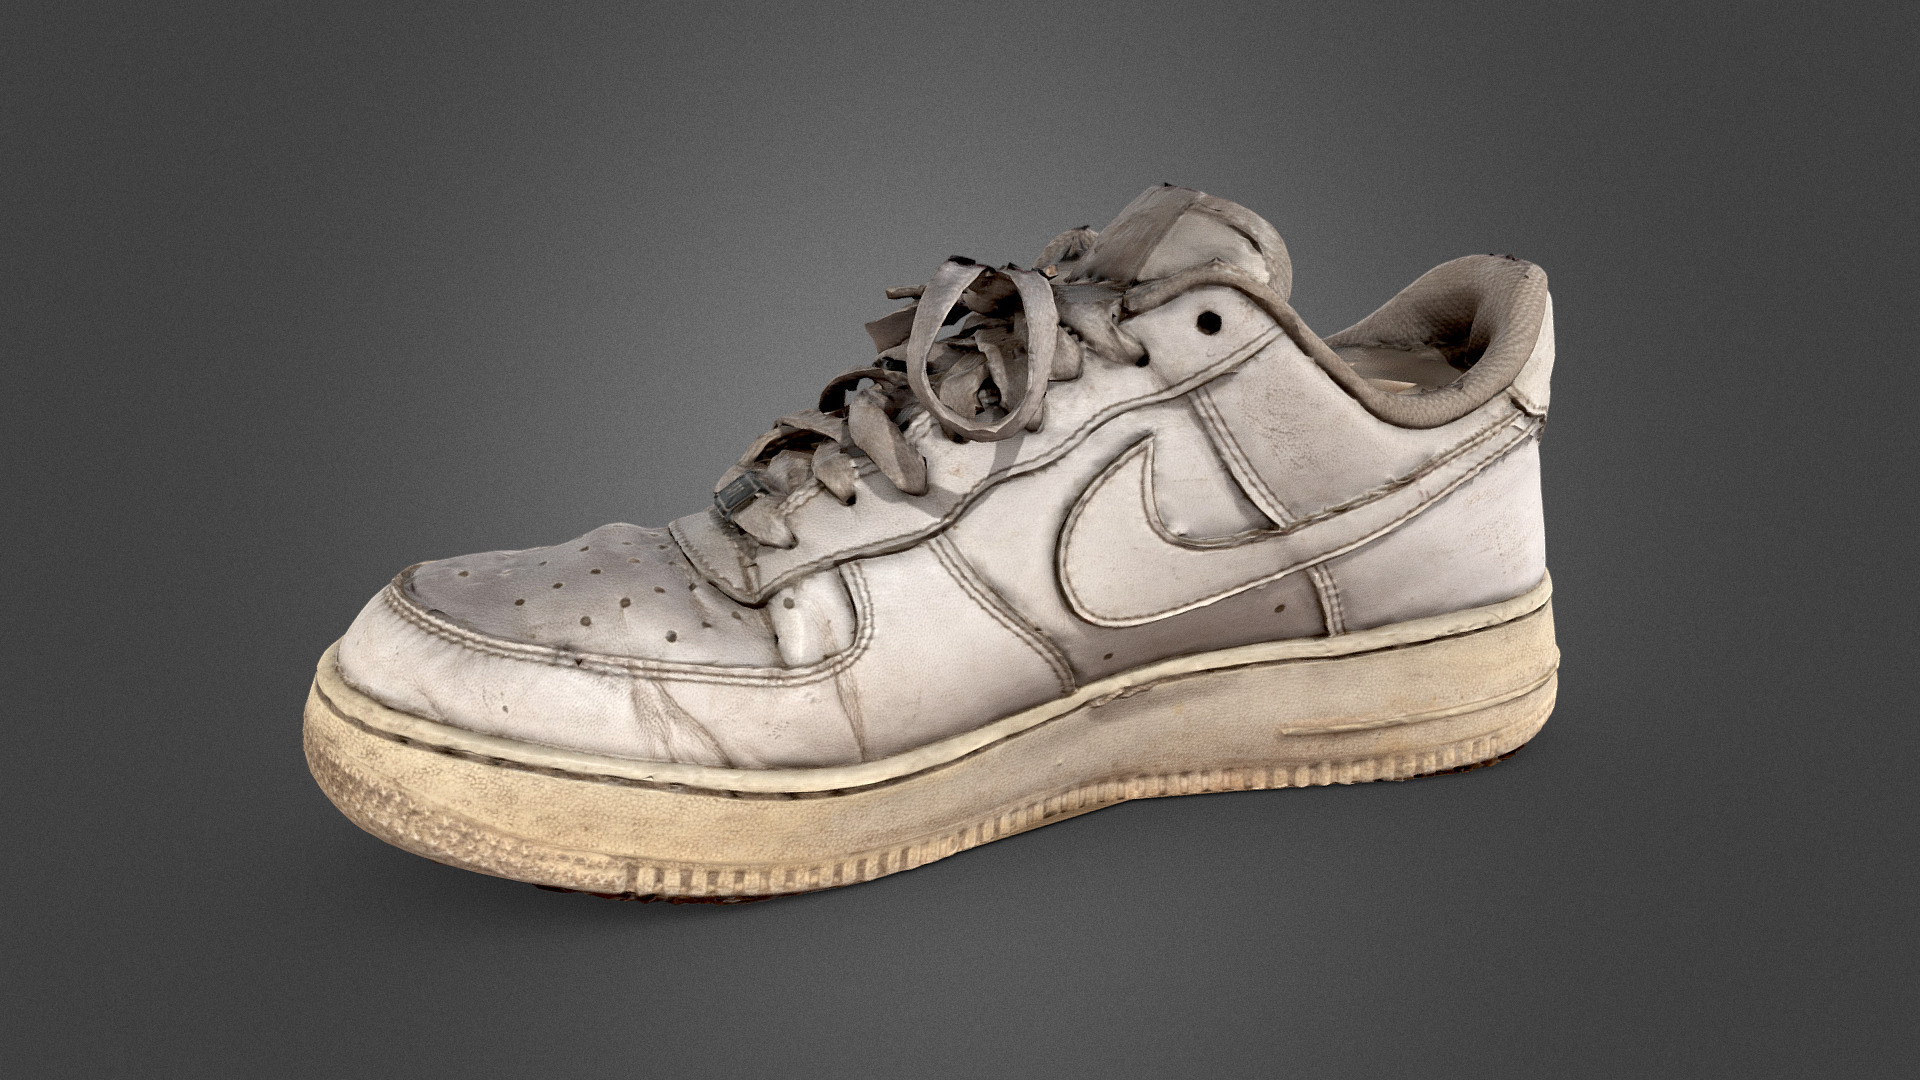 3D model Nike Air Force One White Quick scan - This is a 3D model of the Nike Air Force One White Quick scan. The 3D model is about a white and grey shoe.